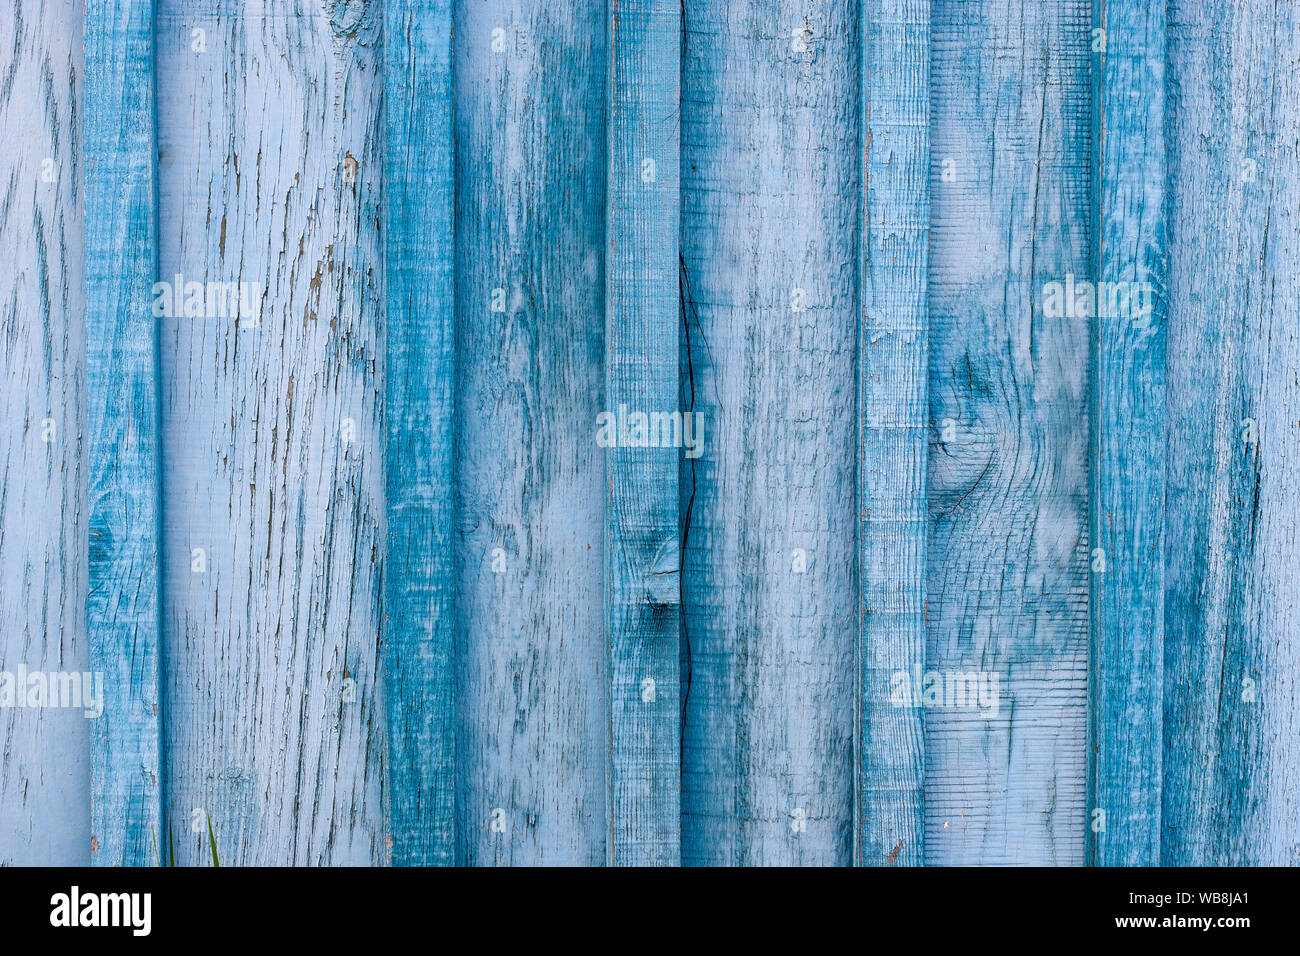 Grunge background. Wooden old blue fence. The gaps between the boards are clogged with slats. The paint is peeling and cracked. Stock Photo